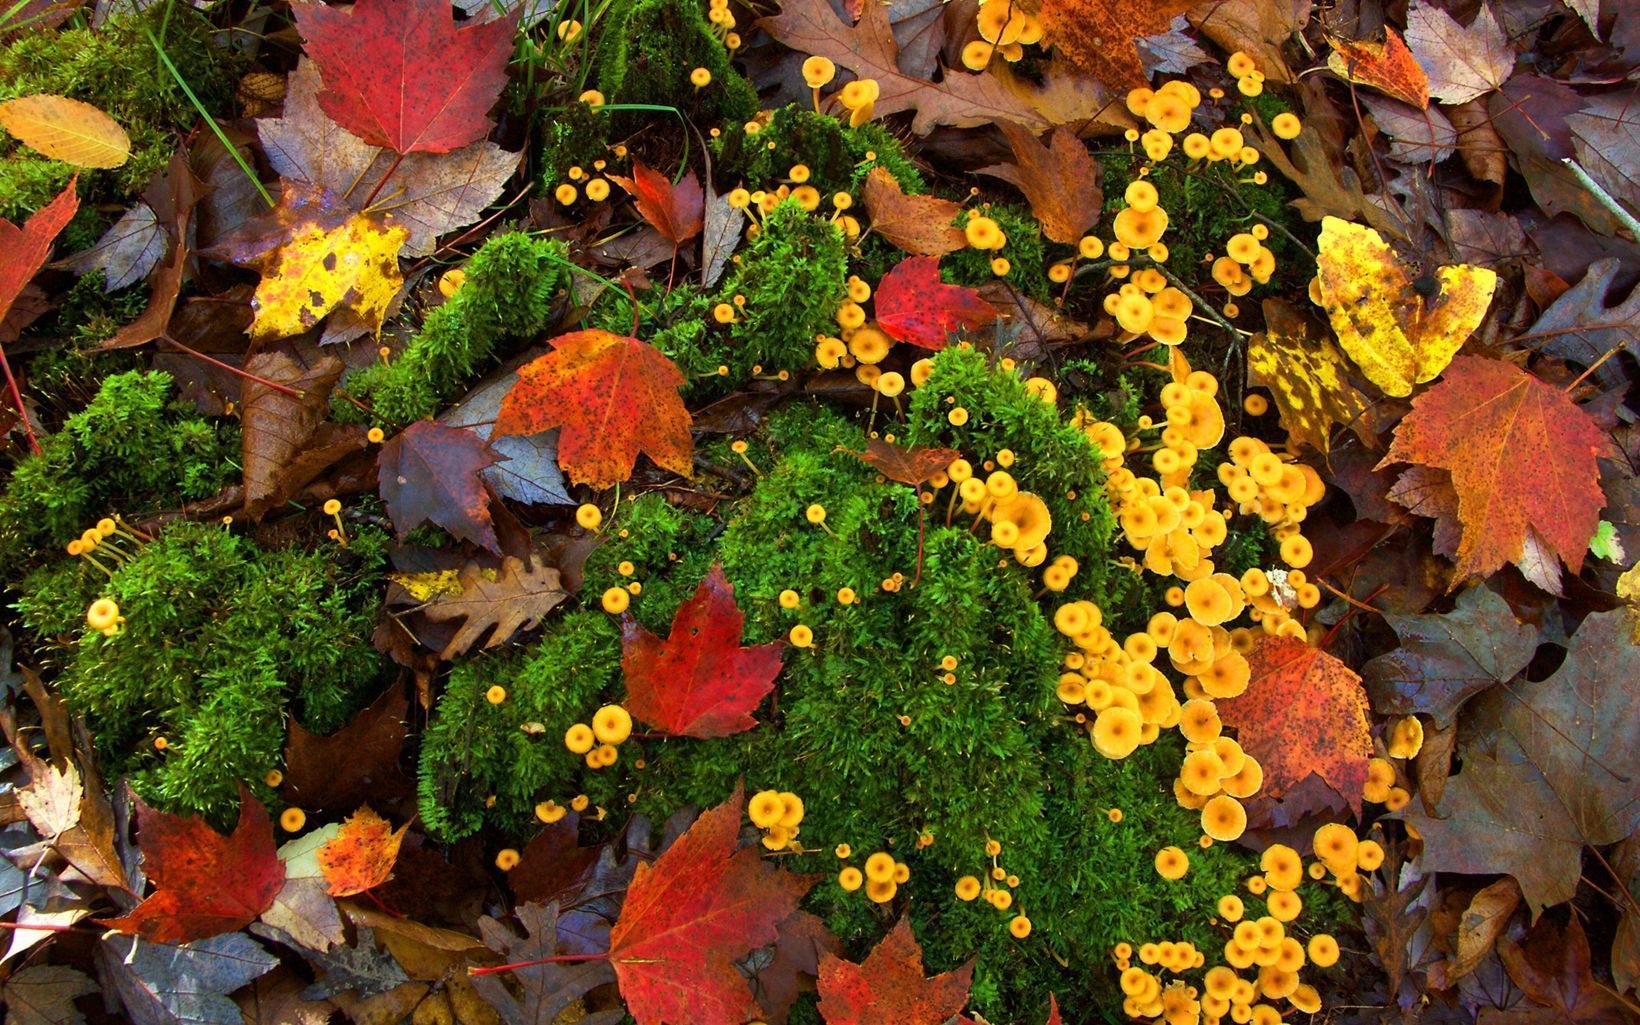 Bright yellow mushrooms on moss surrounded by fallen leaves.